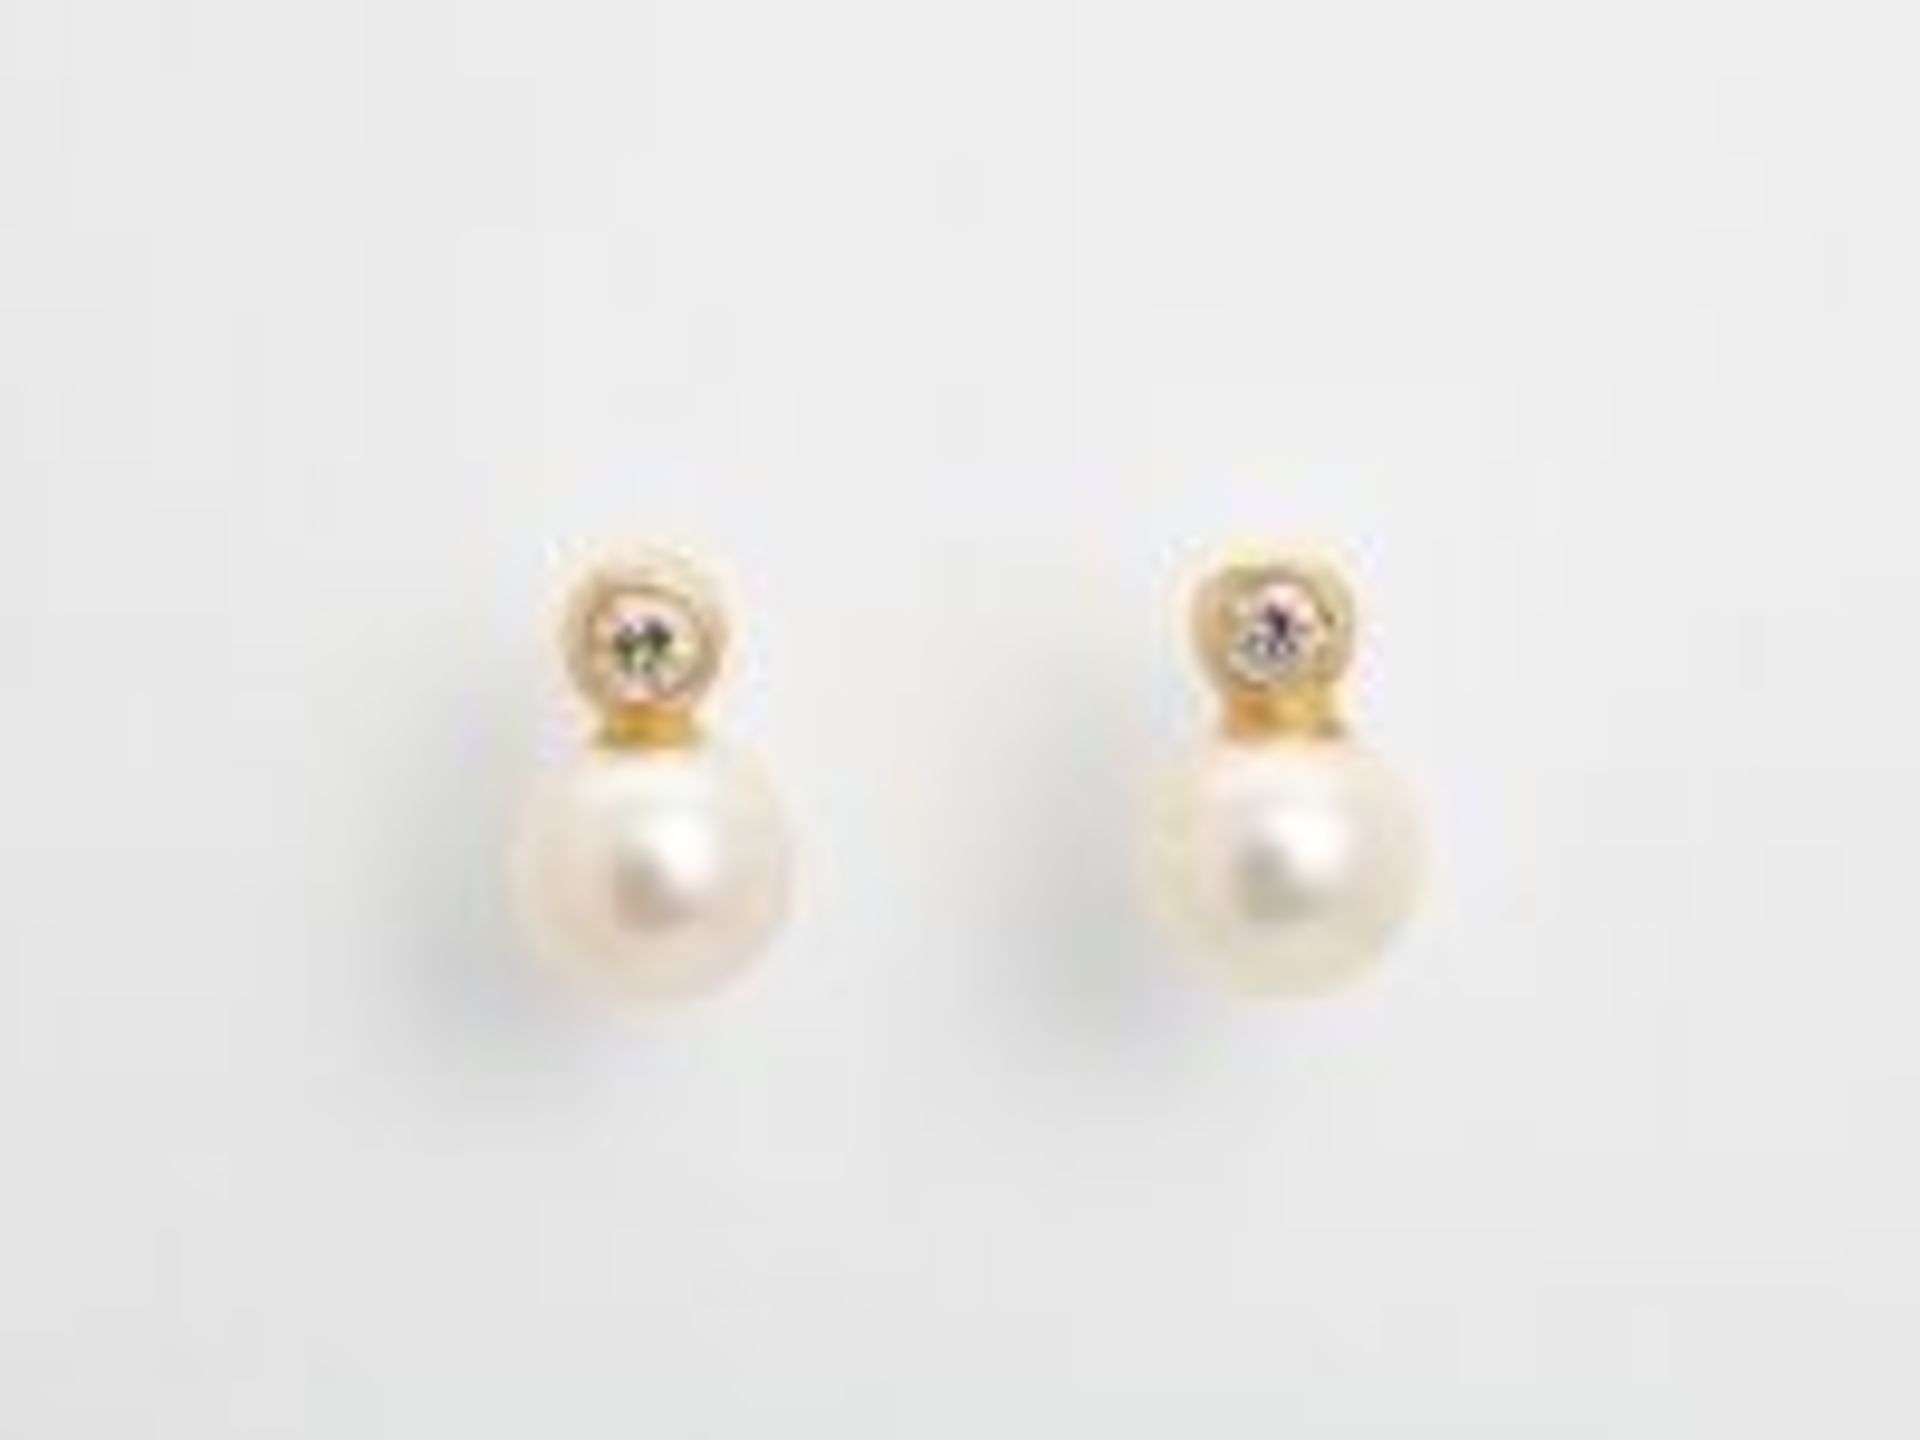 A PAIR OF 14 CARAT YELLOW GOLD EAR STUDS WITH PEARLS AND DIAMONDS hallmarked ‘14K’ and with a